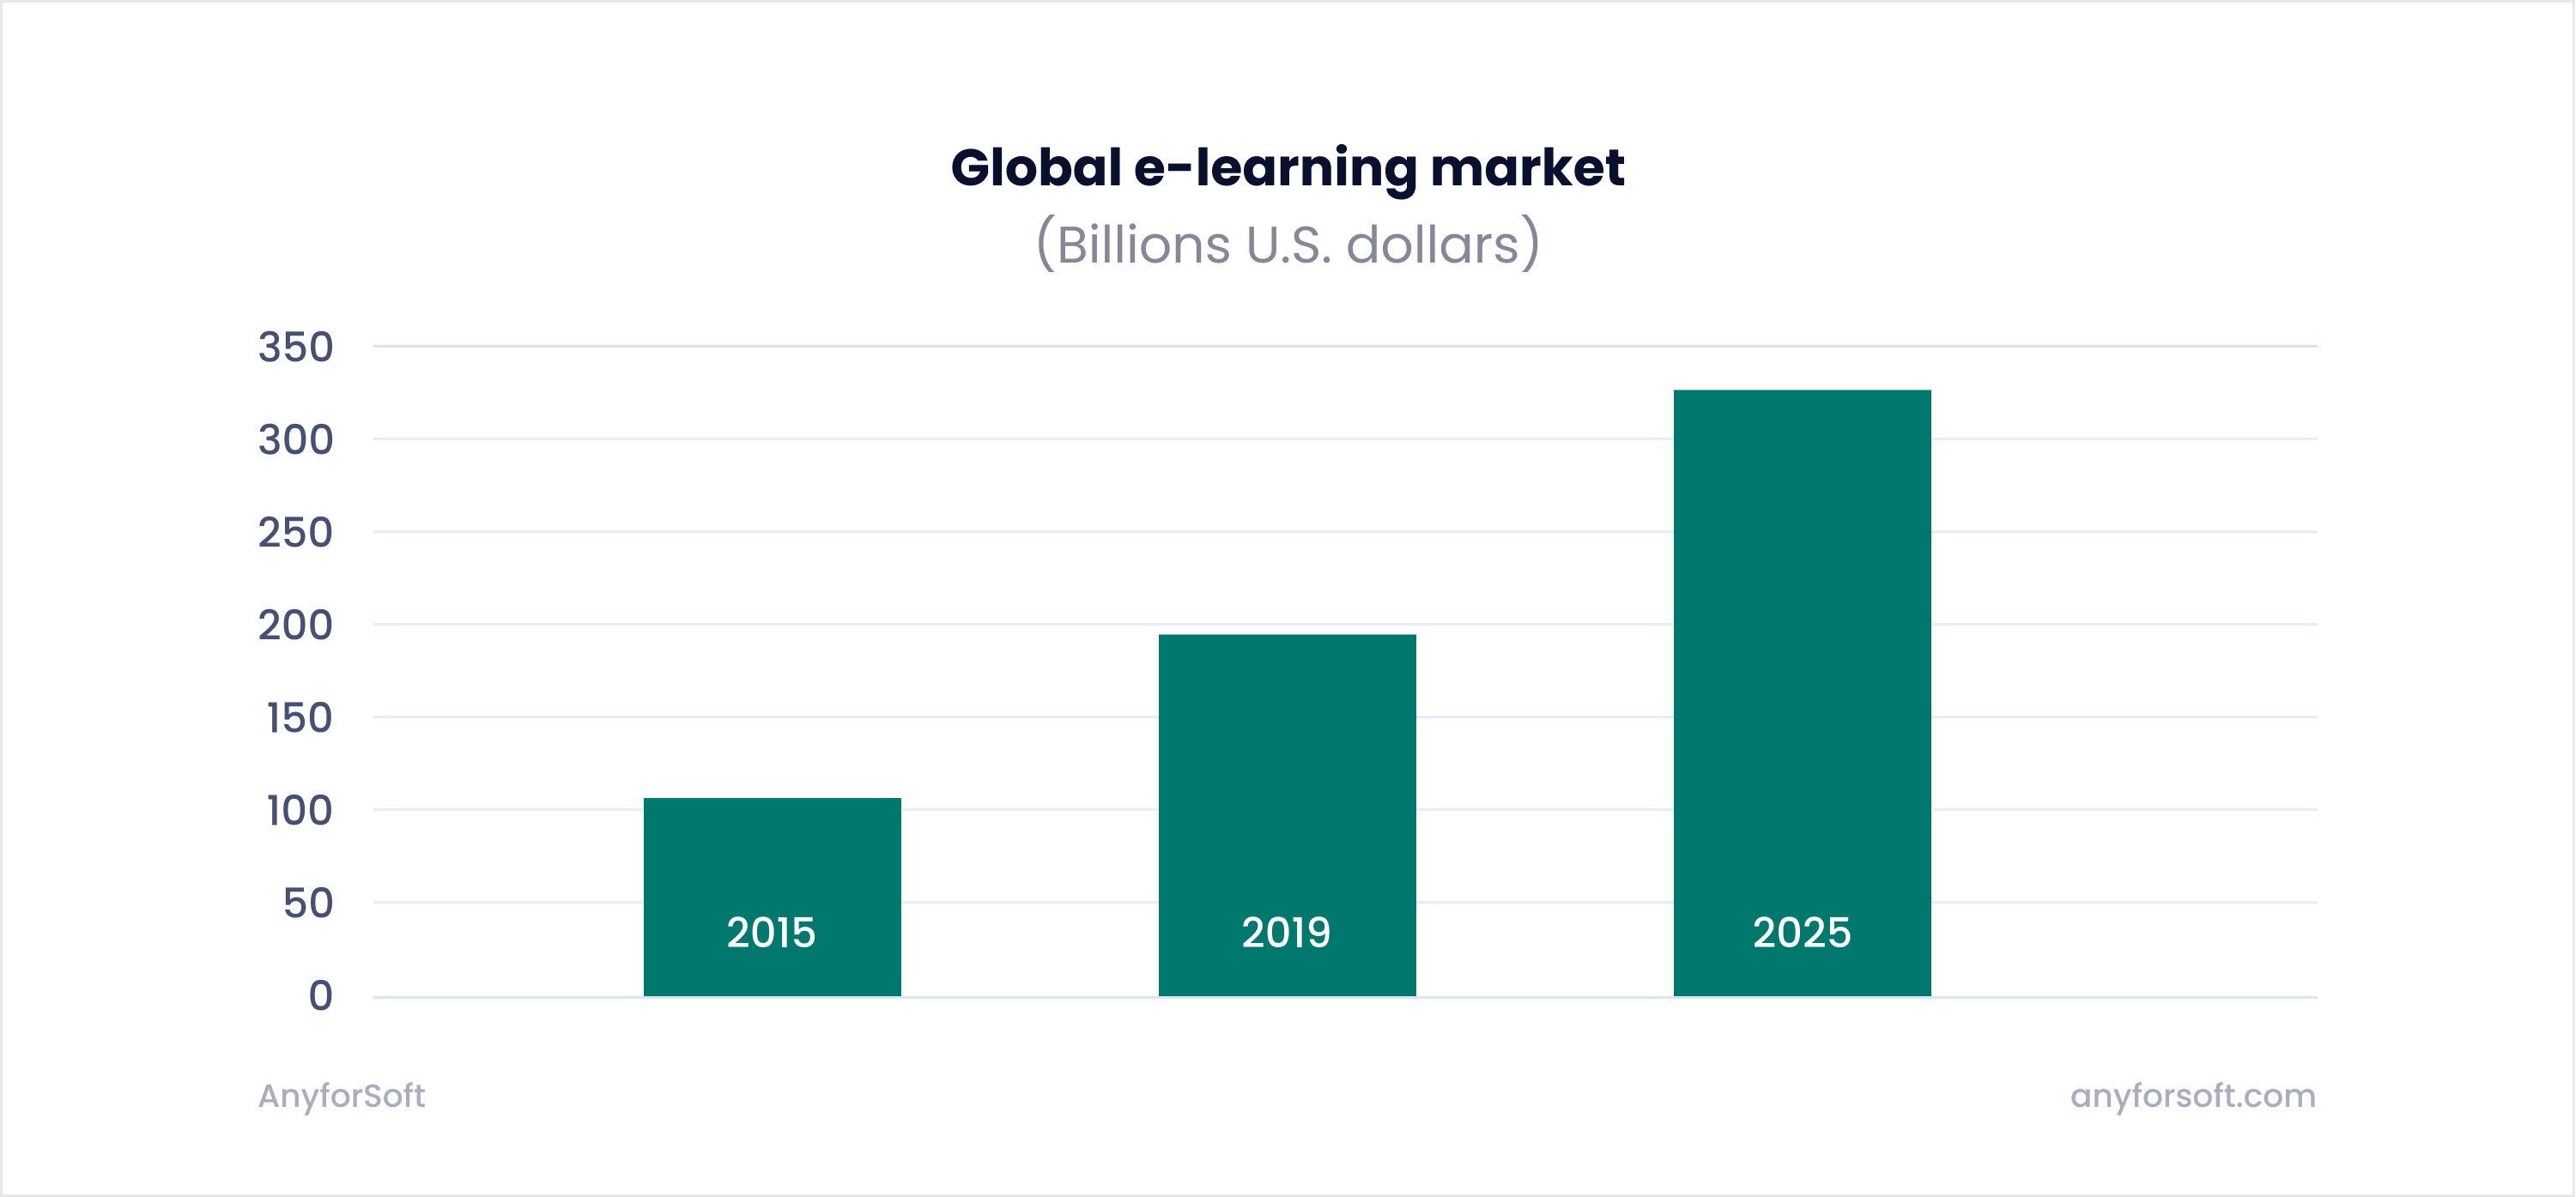 E-learning market is predicted to expand even more